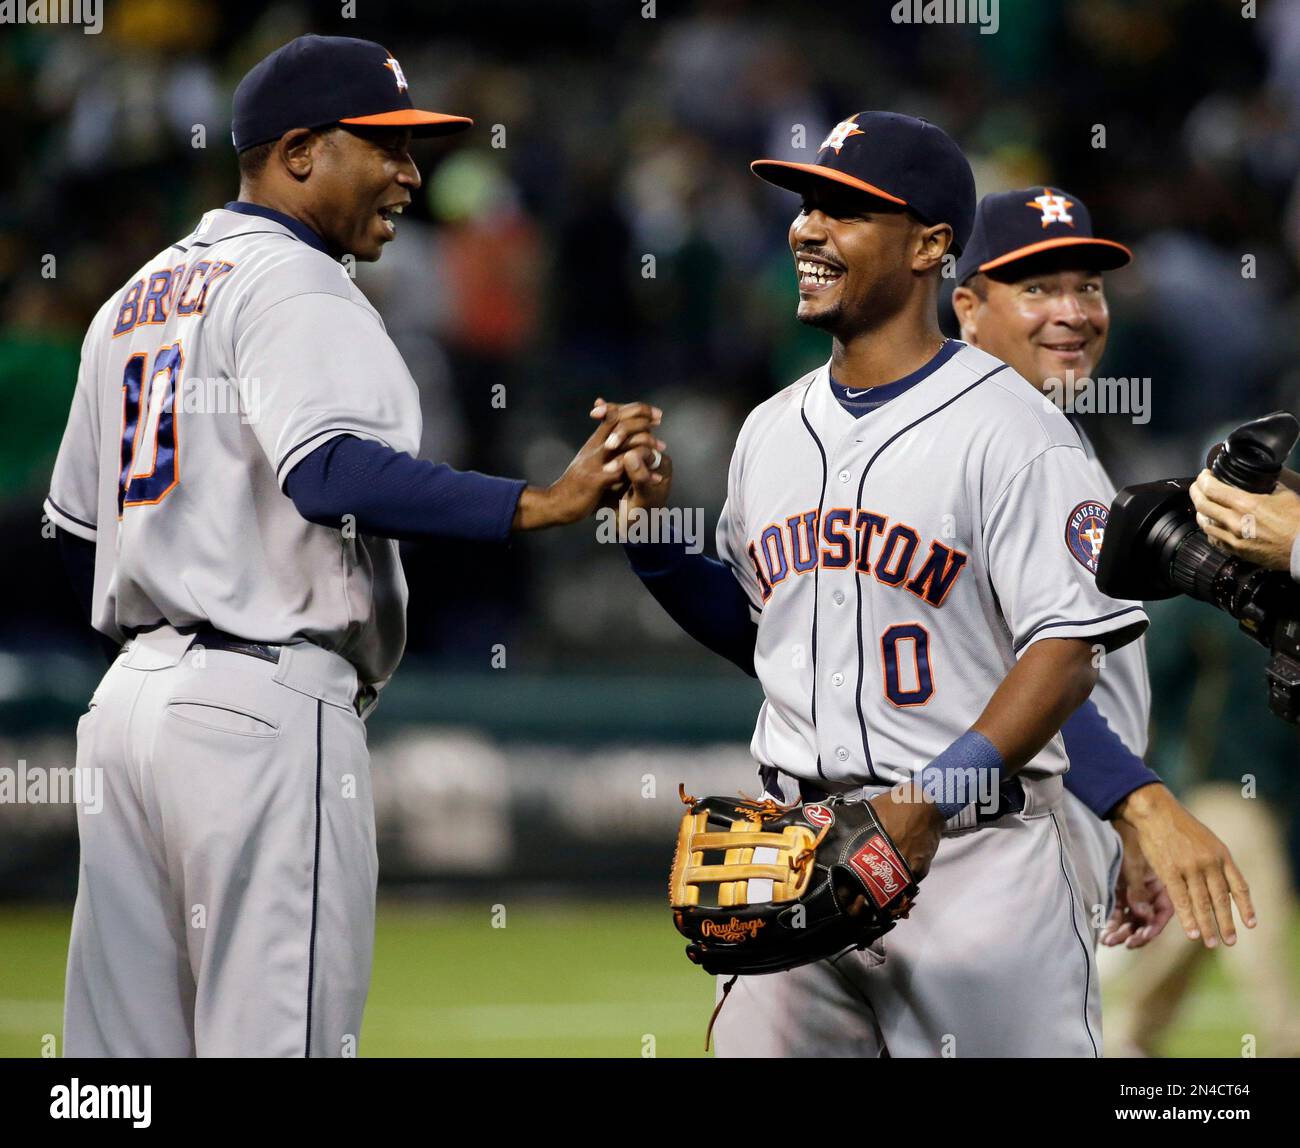 Houston Astros' L.J. Hoes, right, celebrates after his solo home run  against the Oakland Athletics during the 12th inning of a baseball game on  Tuesday, July 22, 2014, in Oakland, Calif. Houston